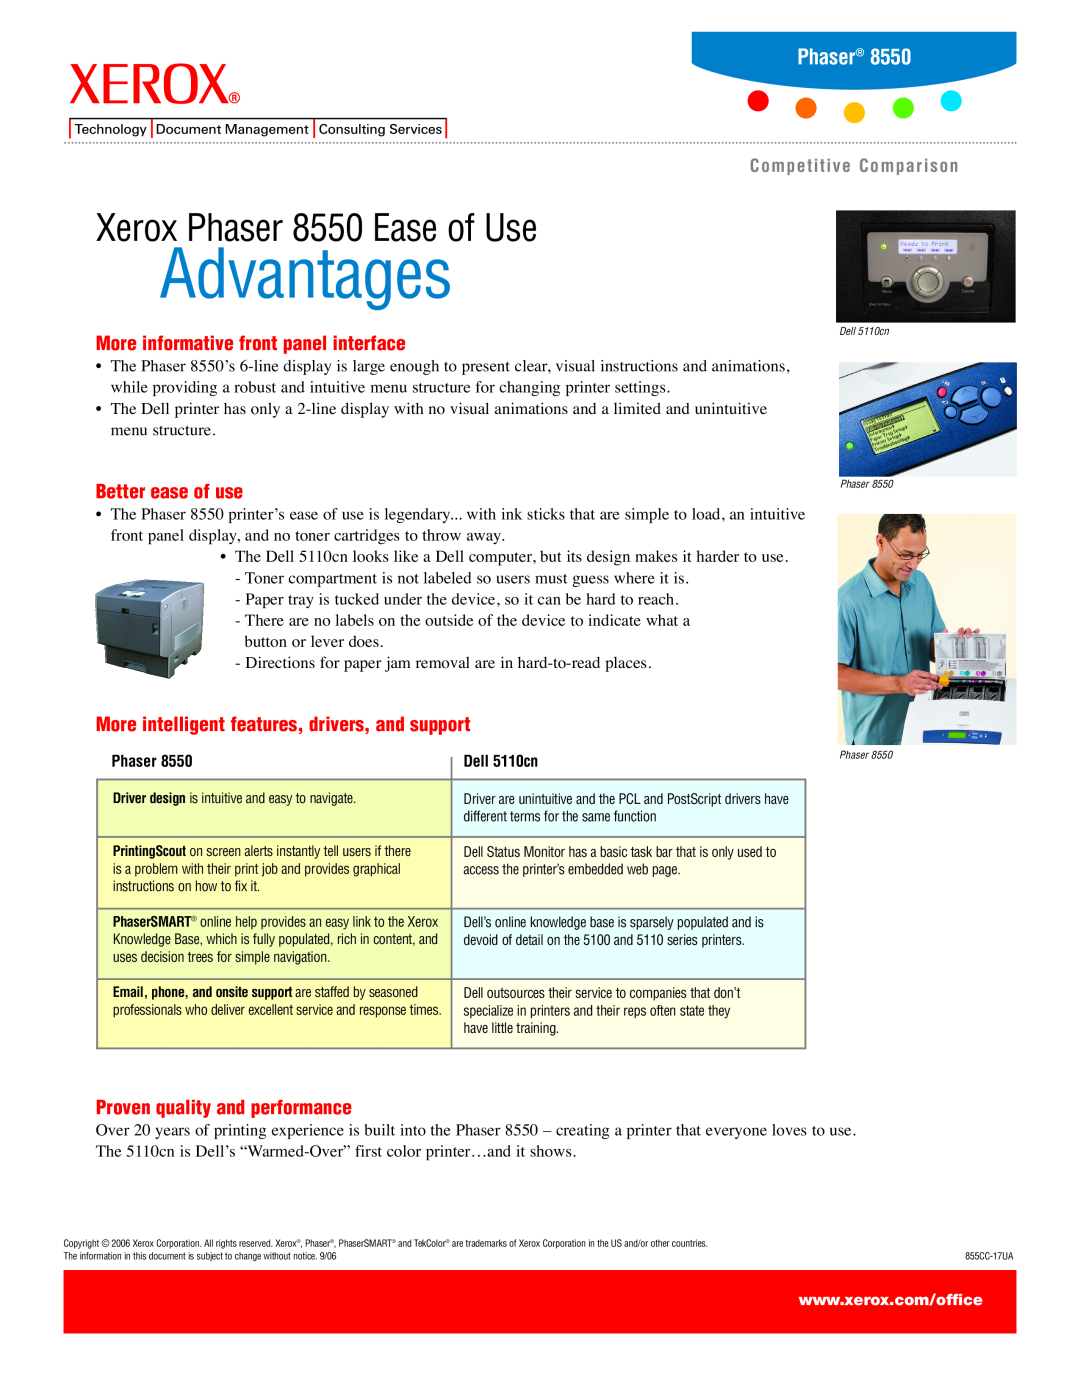 Xerox manual Xerox Phaser 8550 Ease of Use, Advantages, More informative front panel interface, Better ease of use 